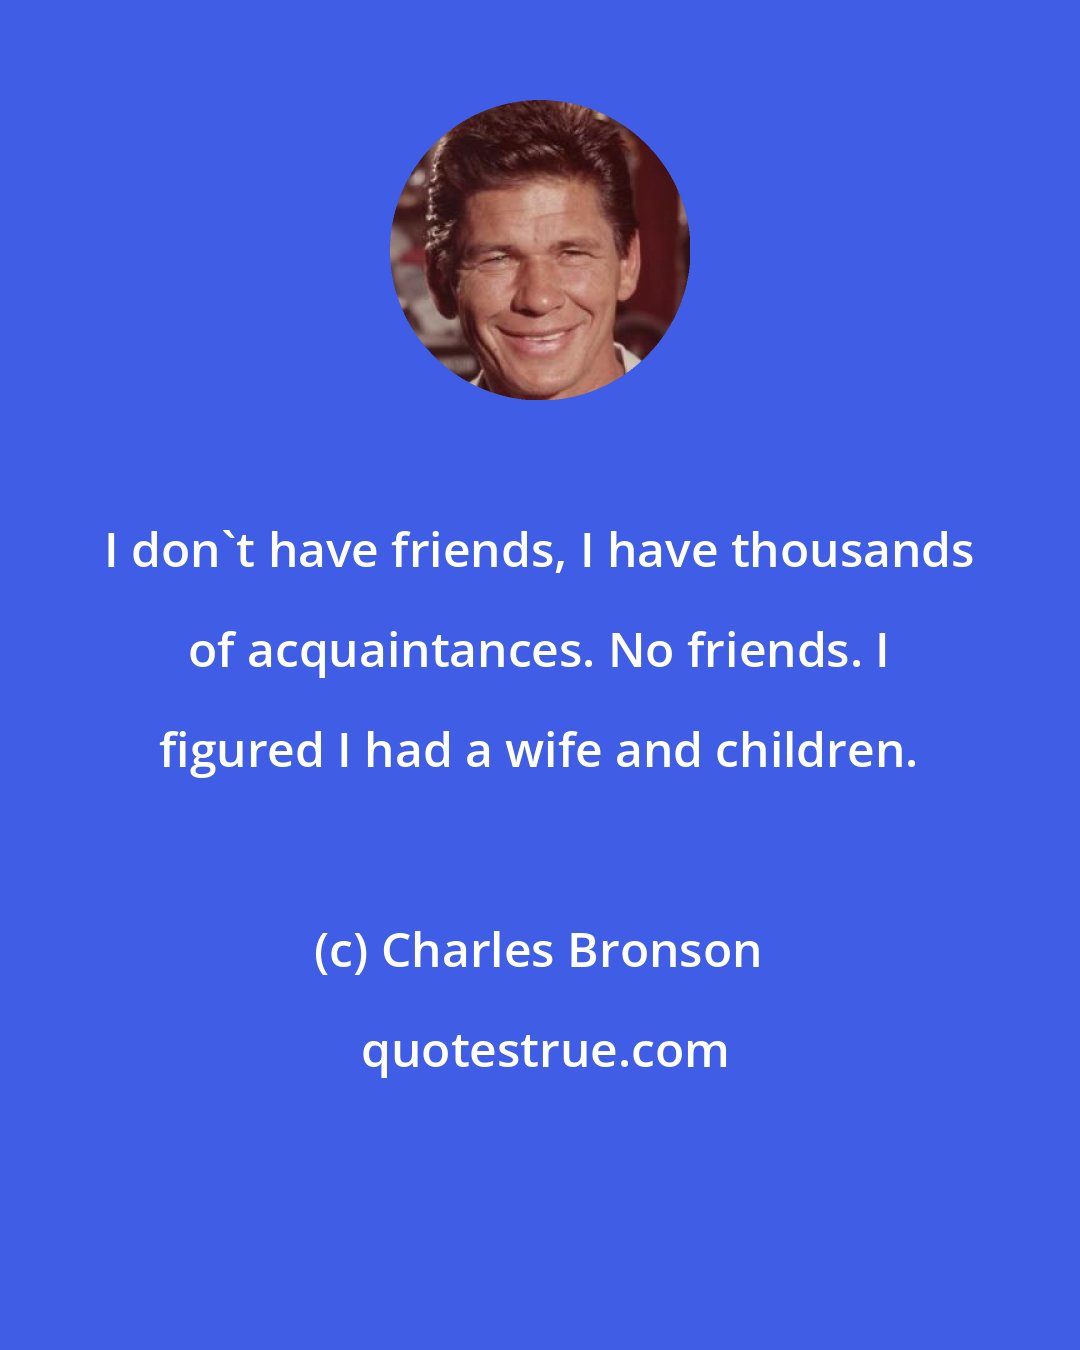 Charles Bronson: I don't have friends, I have thousands of acquaintances. No friends. I figured I had a wife and children.